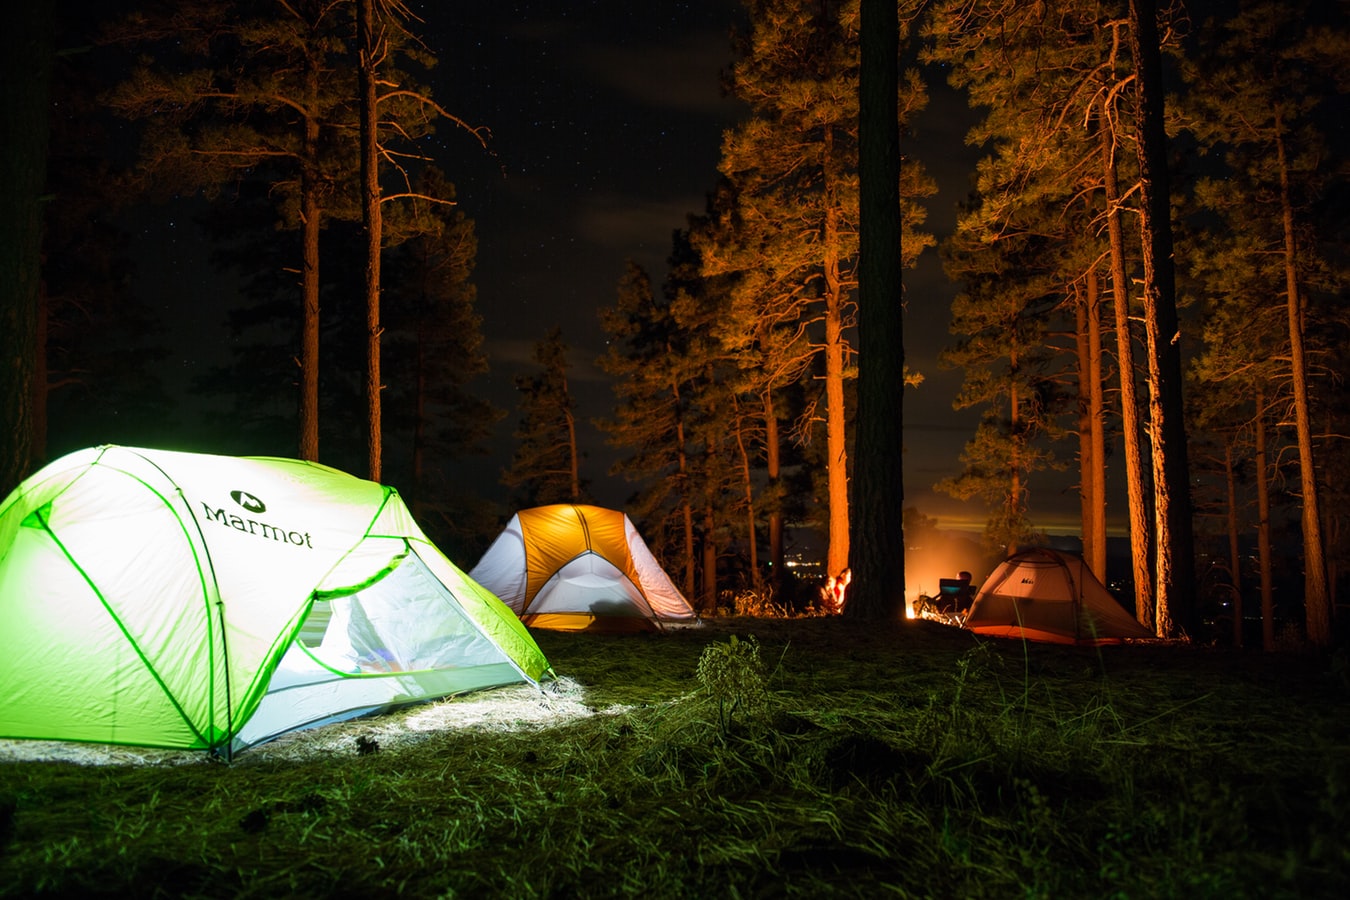 Three tents illuminated in the darkness by lamps and campfire